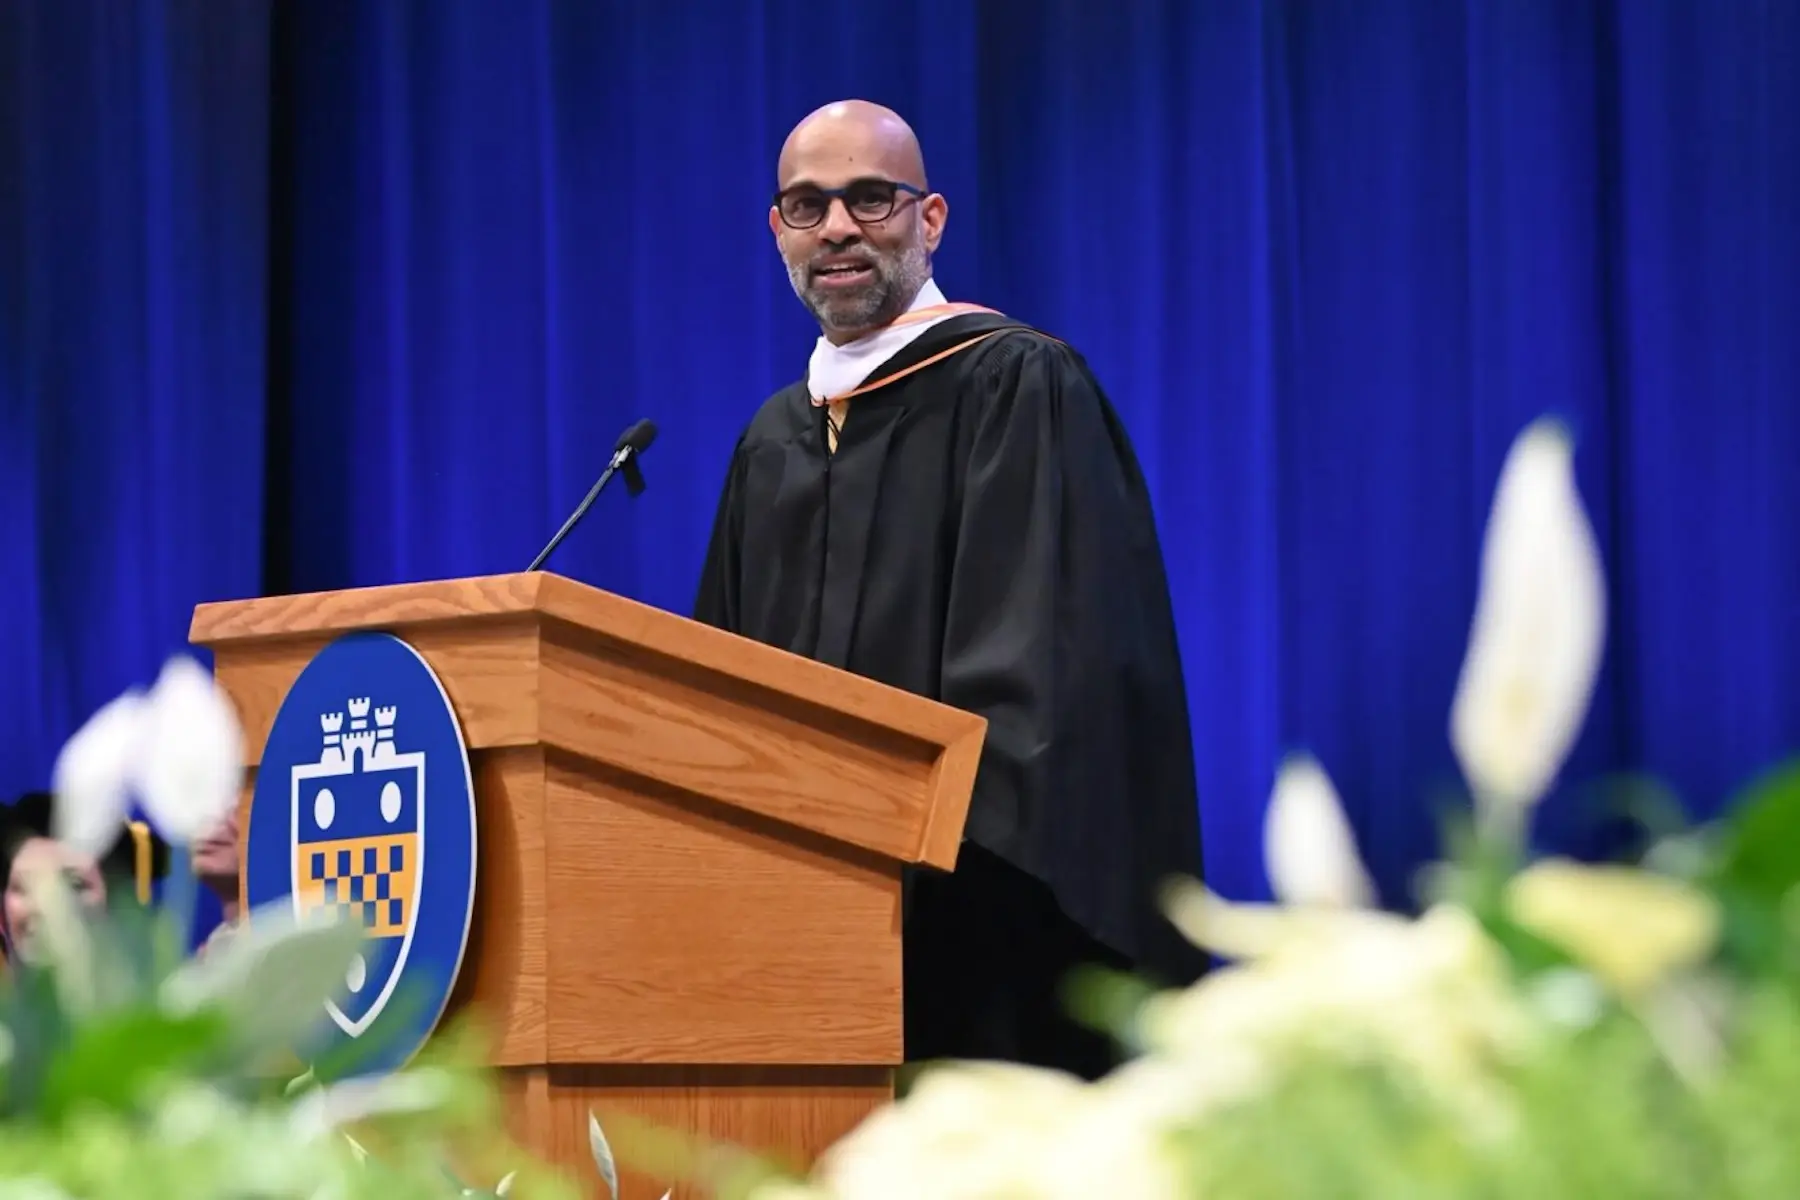 Featured image for “Argue Joyfully: University of Pittsburgh Commencement Address”